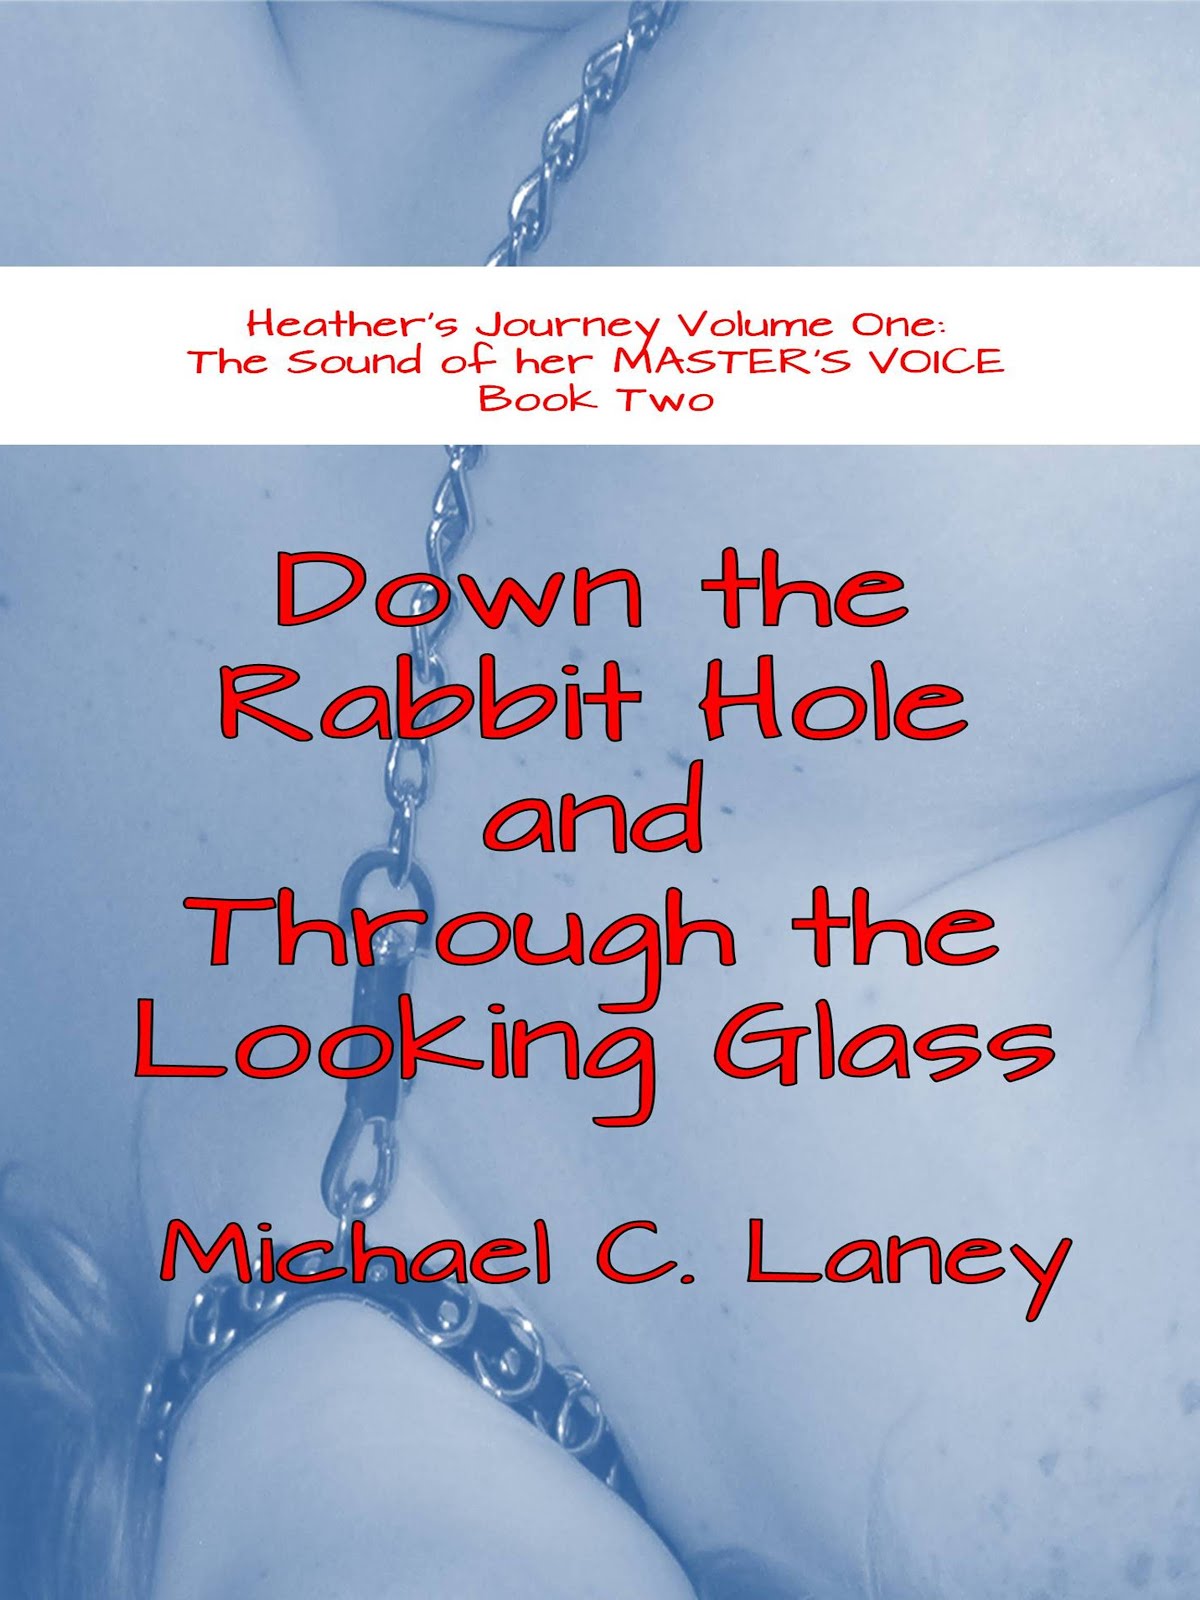 Down the Rabbit Hole and Through the Looking Glass